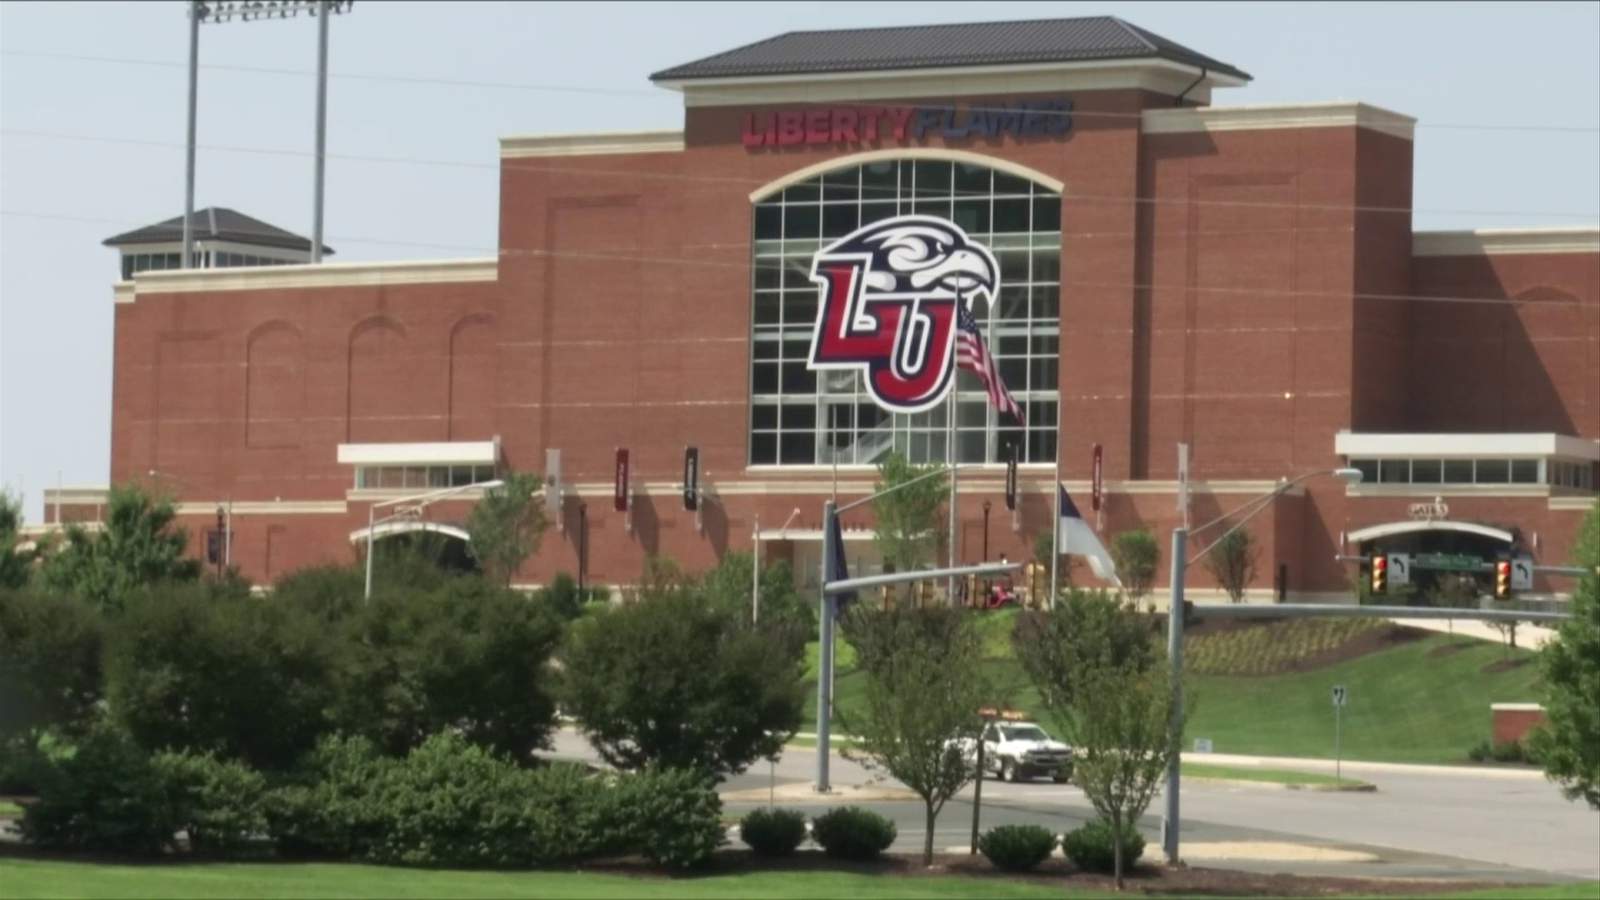 Search for new Liberty University president begins as some suggest North Carolina congressman